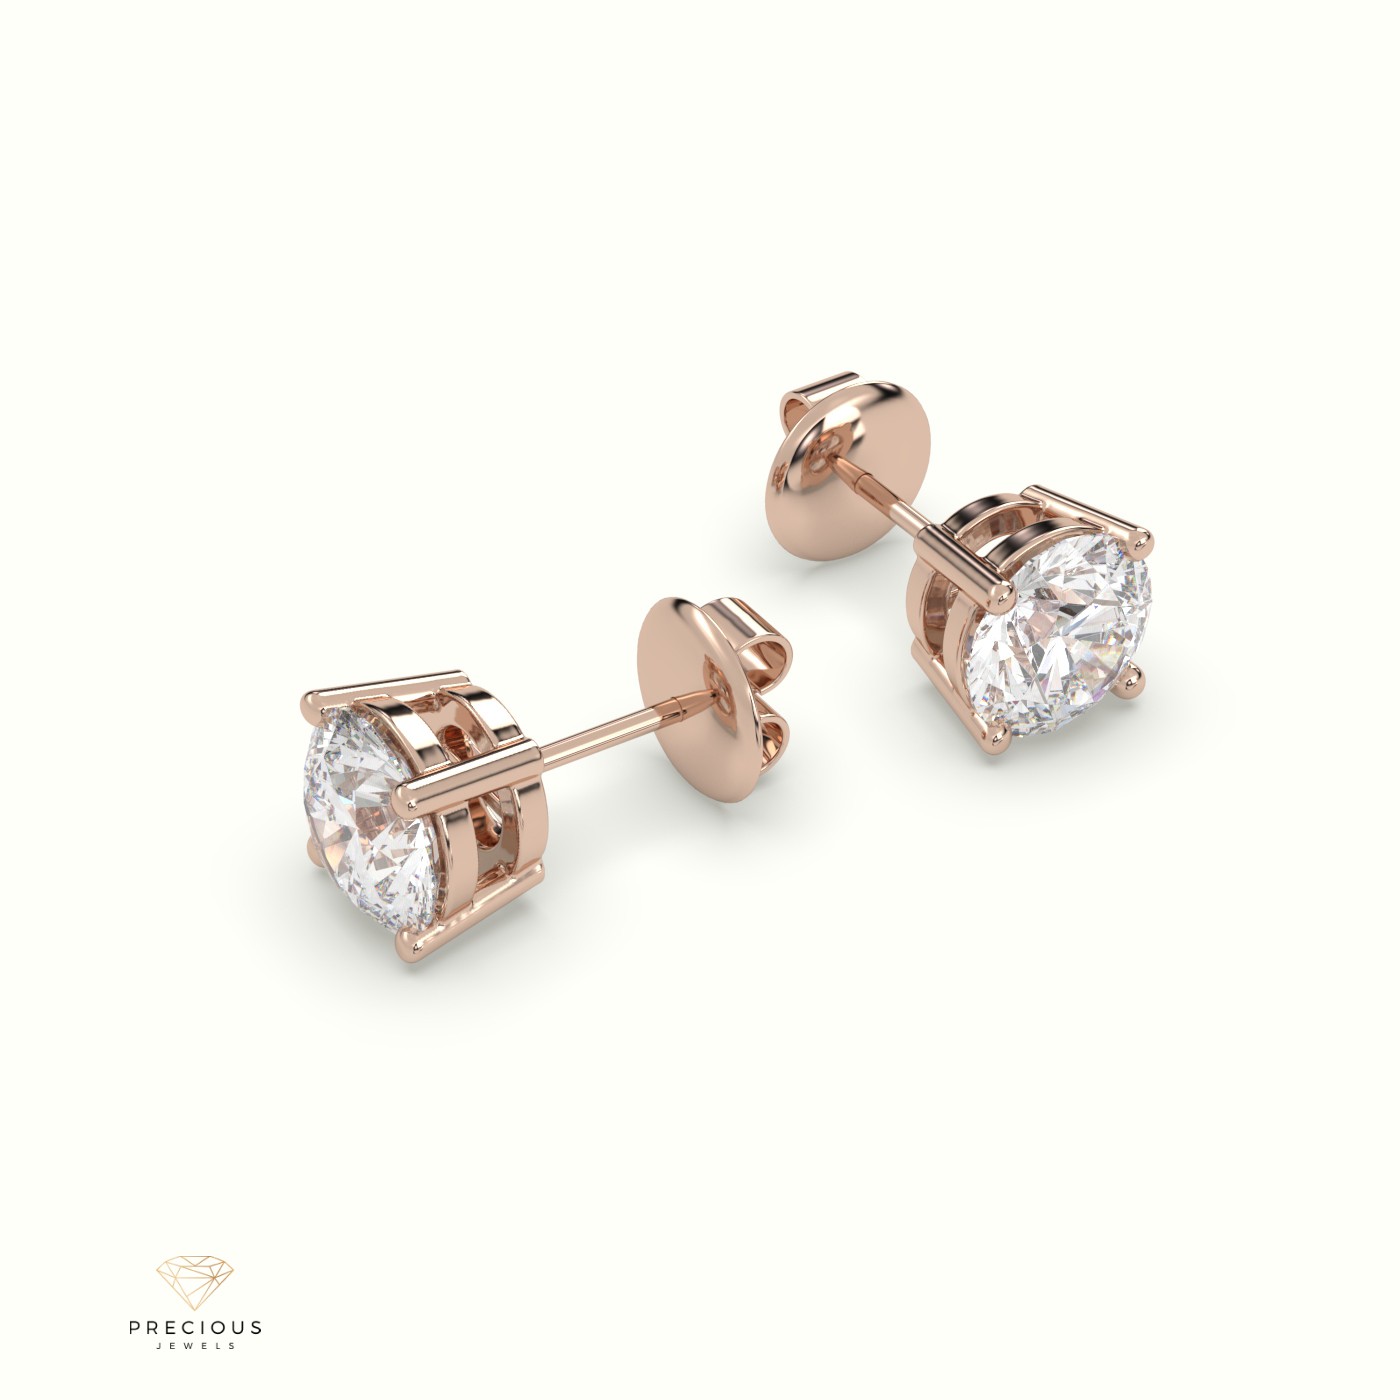 18k rose gold  4 prongs classic round diamond earring studs Photos & images